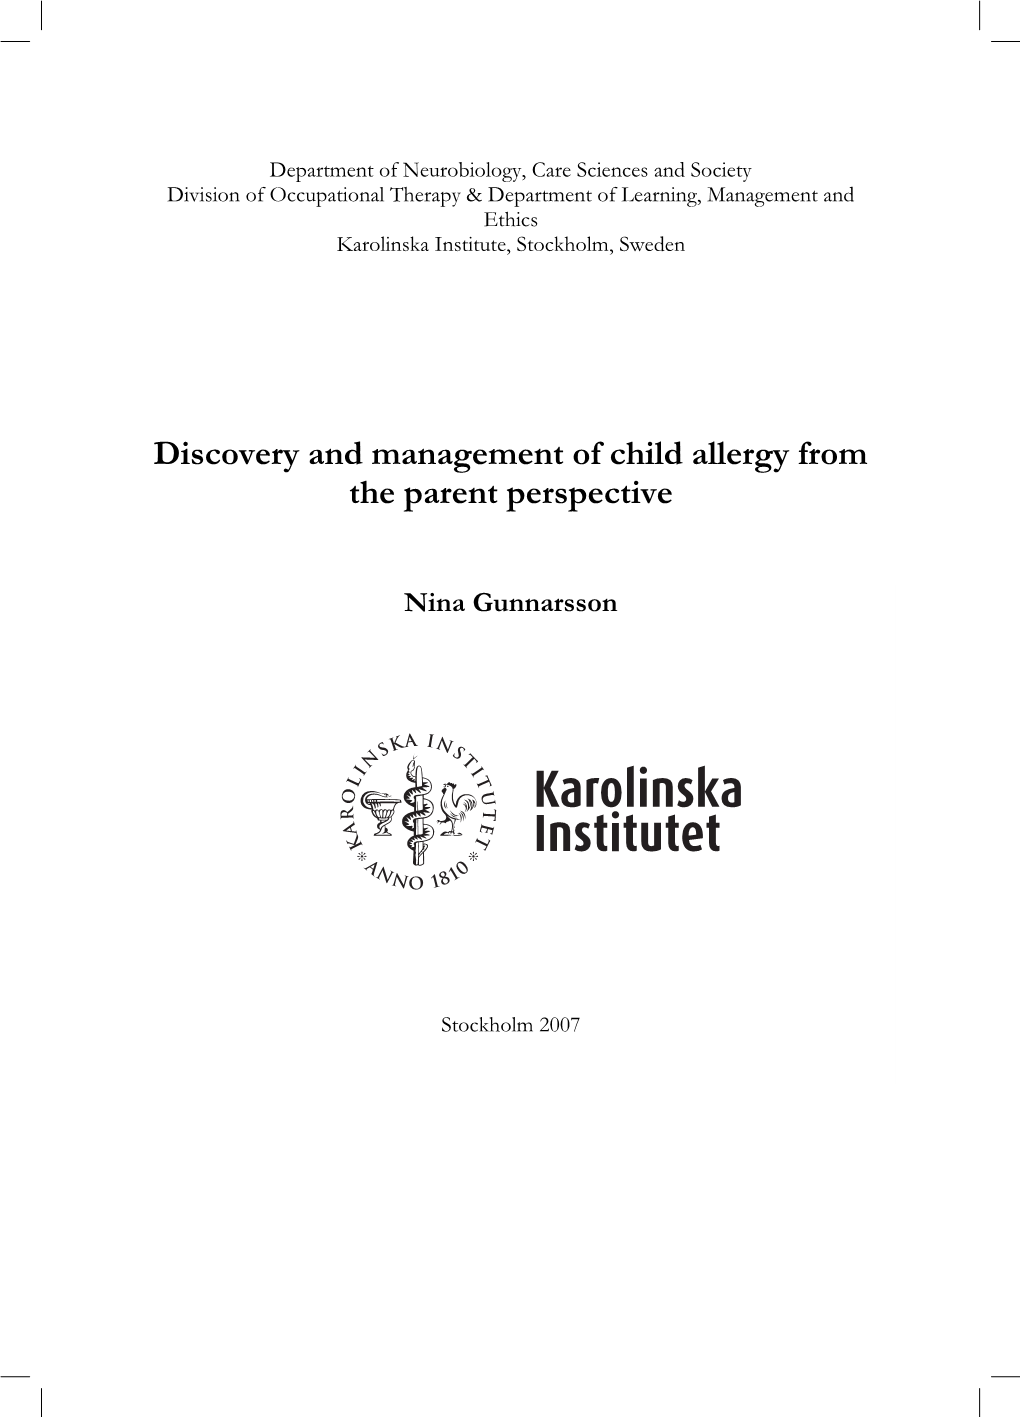 Discovery and Management of Child Allergy from the Parent Perspective